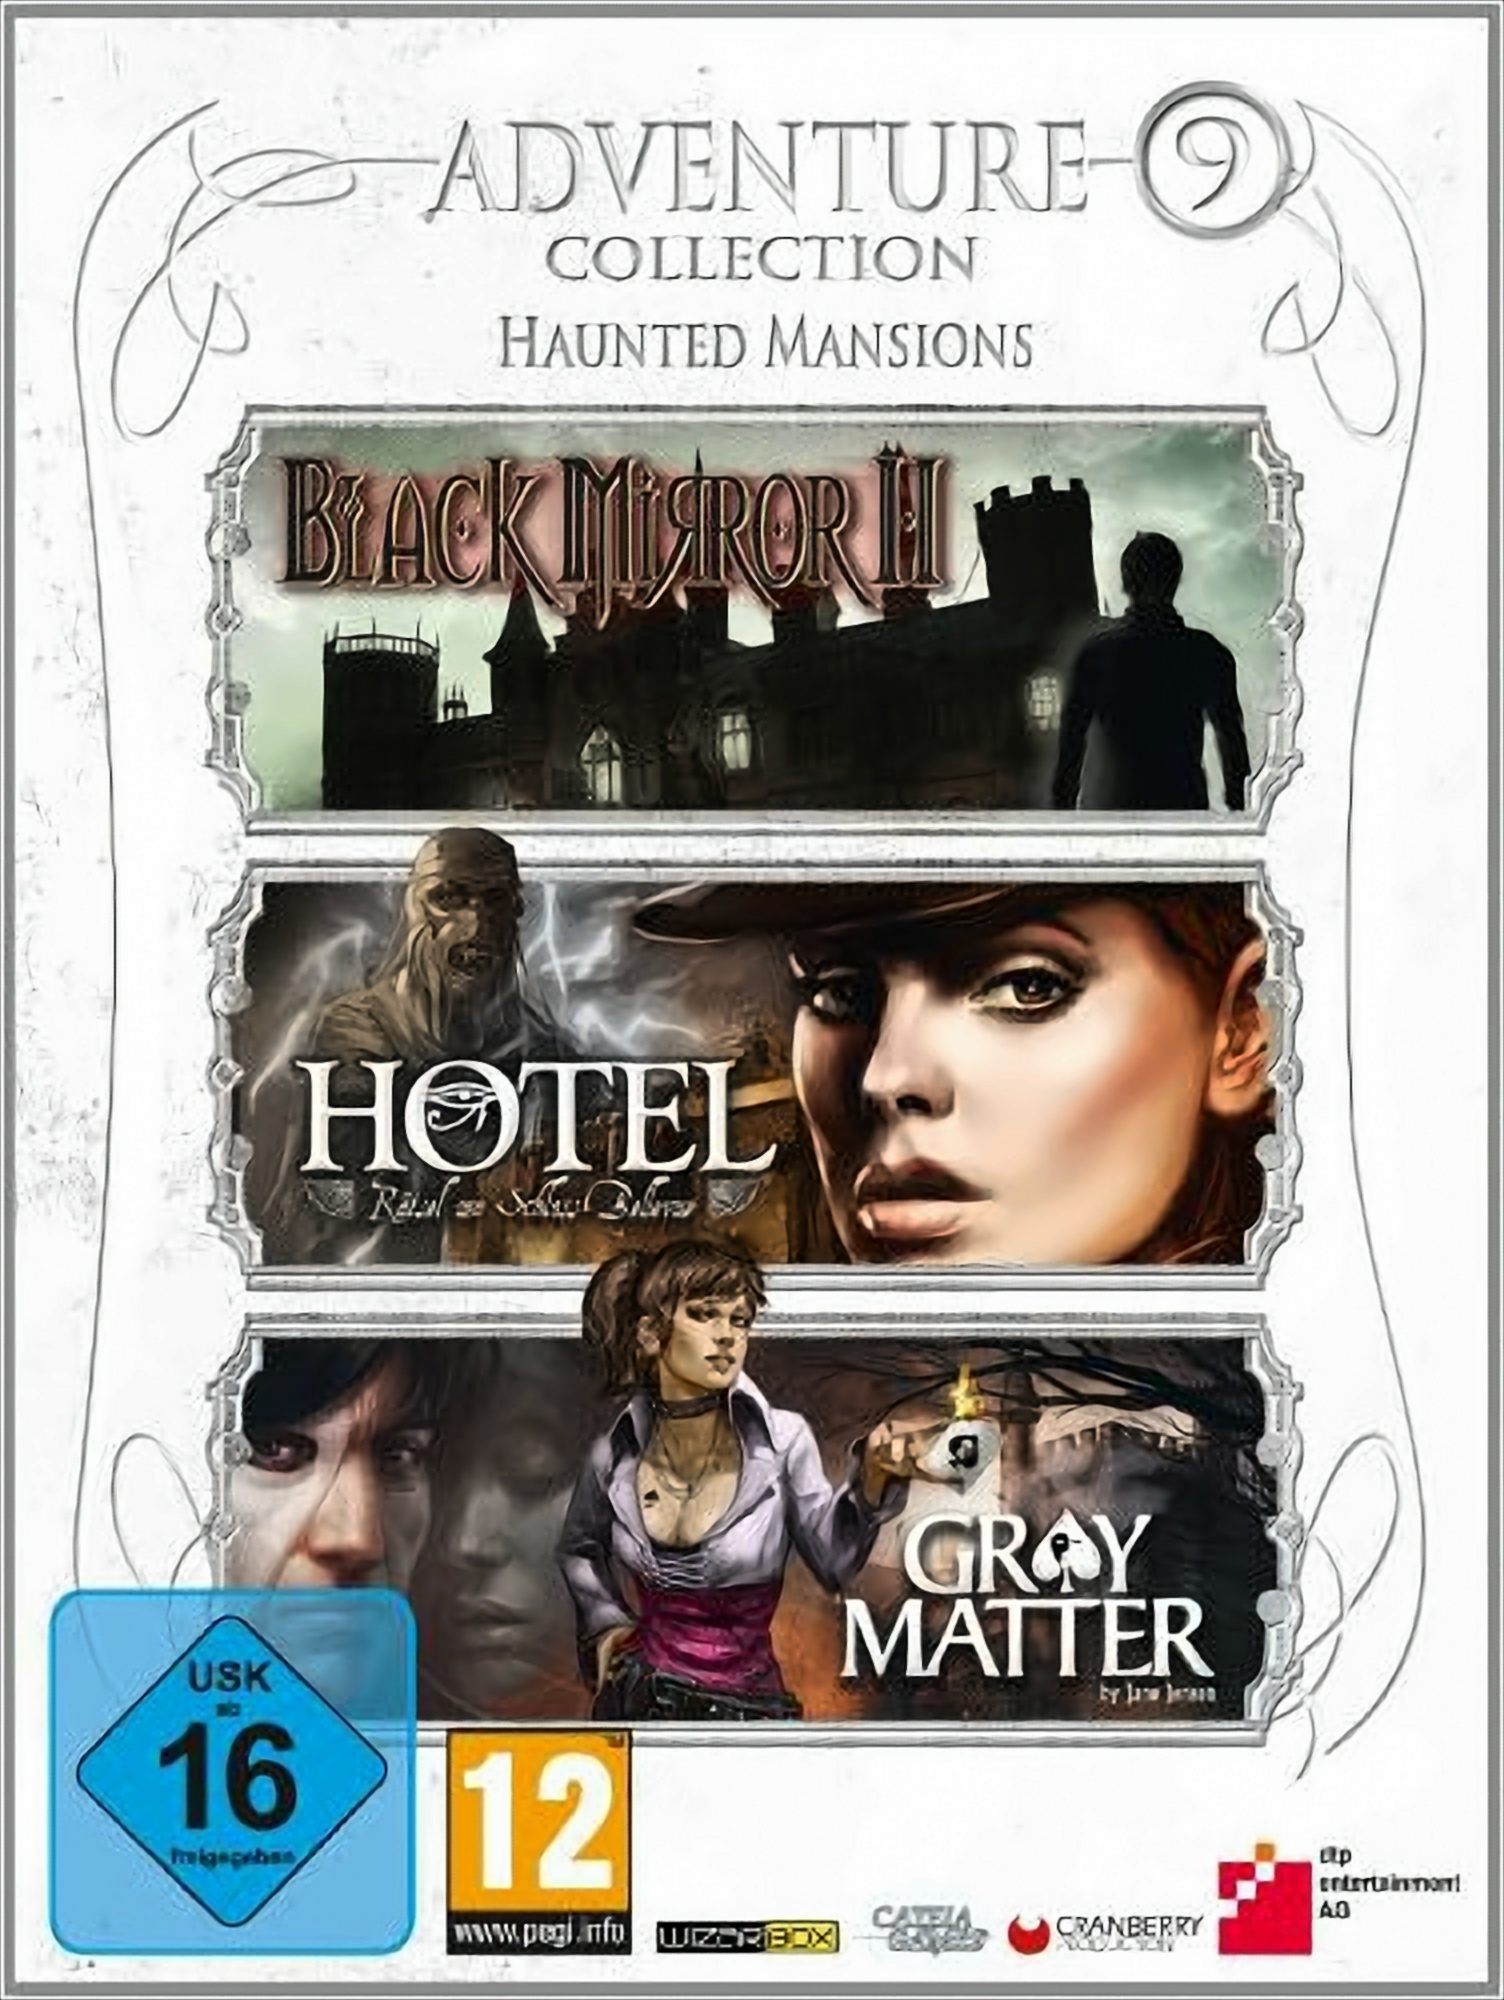 [PC] - 9 - Mansions Adventure Haunted Collection